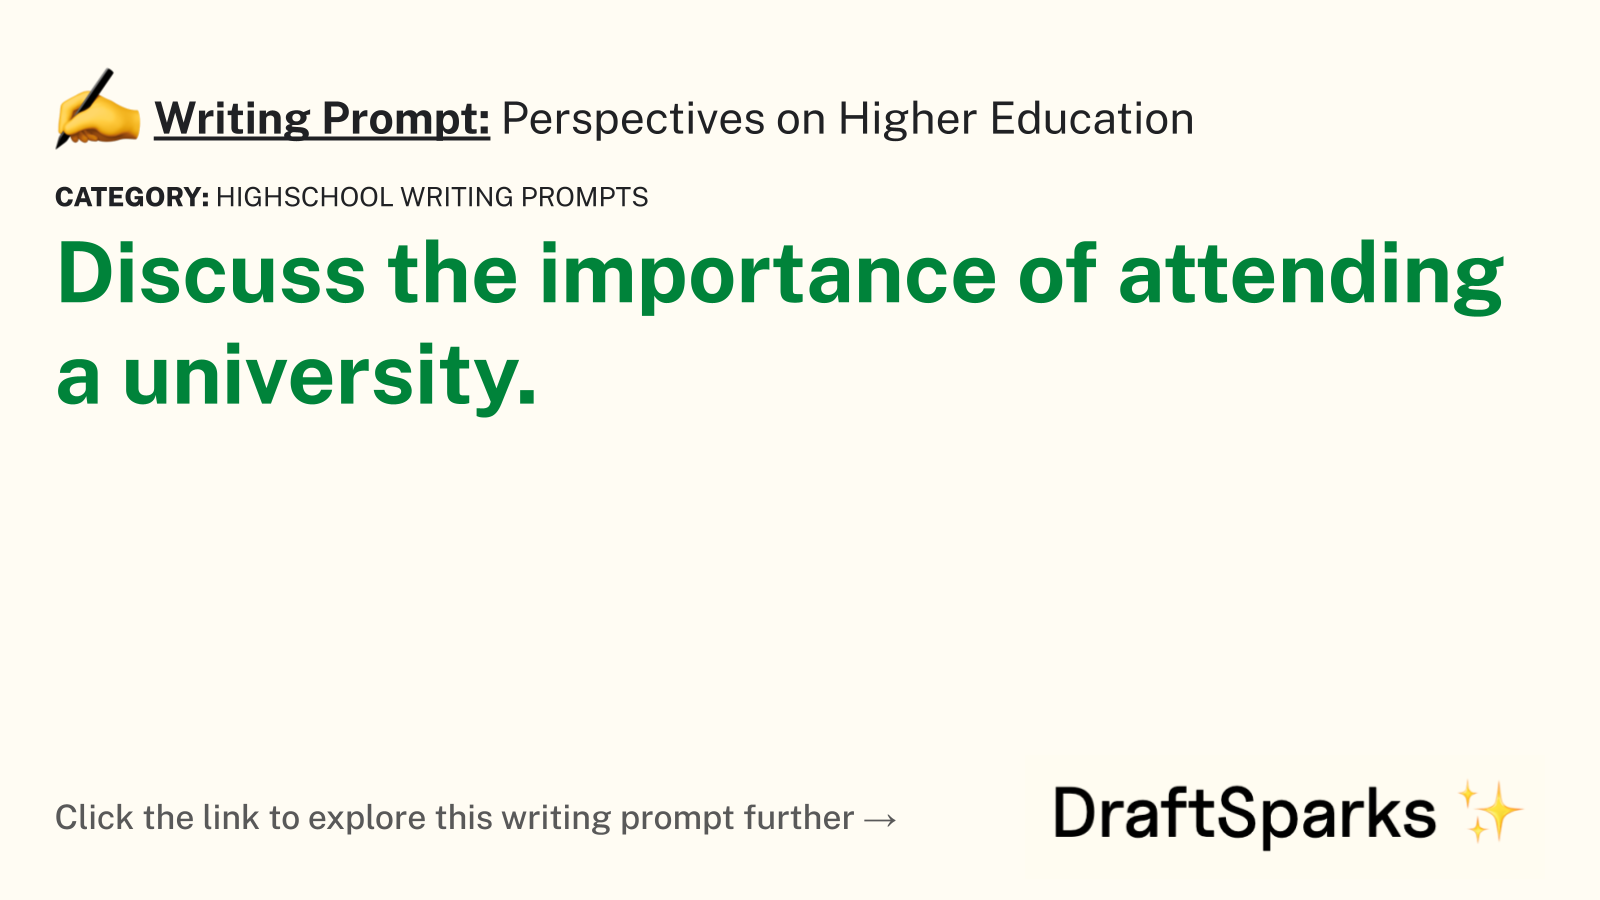 Perspectives on Higher Education